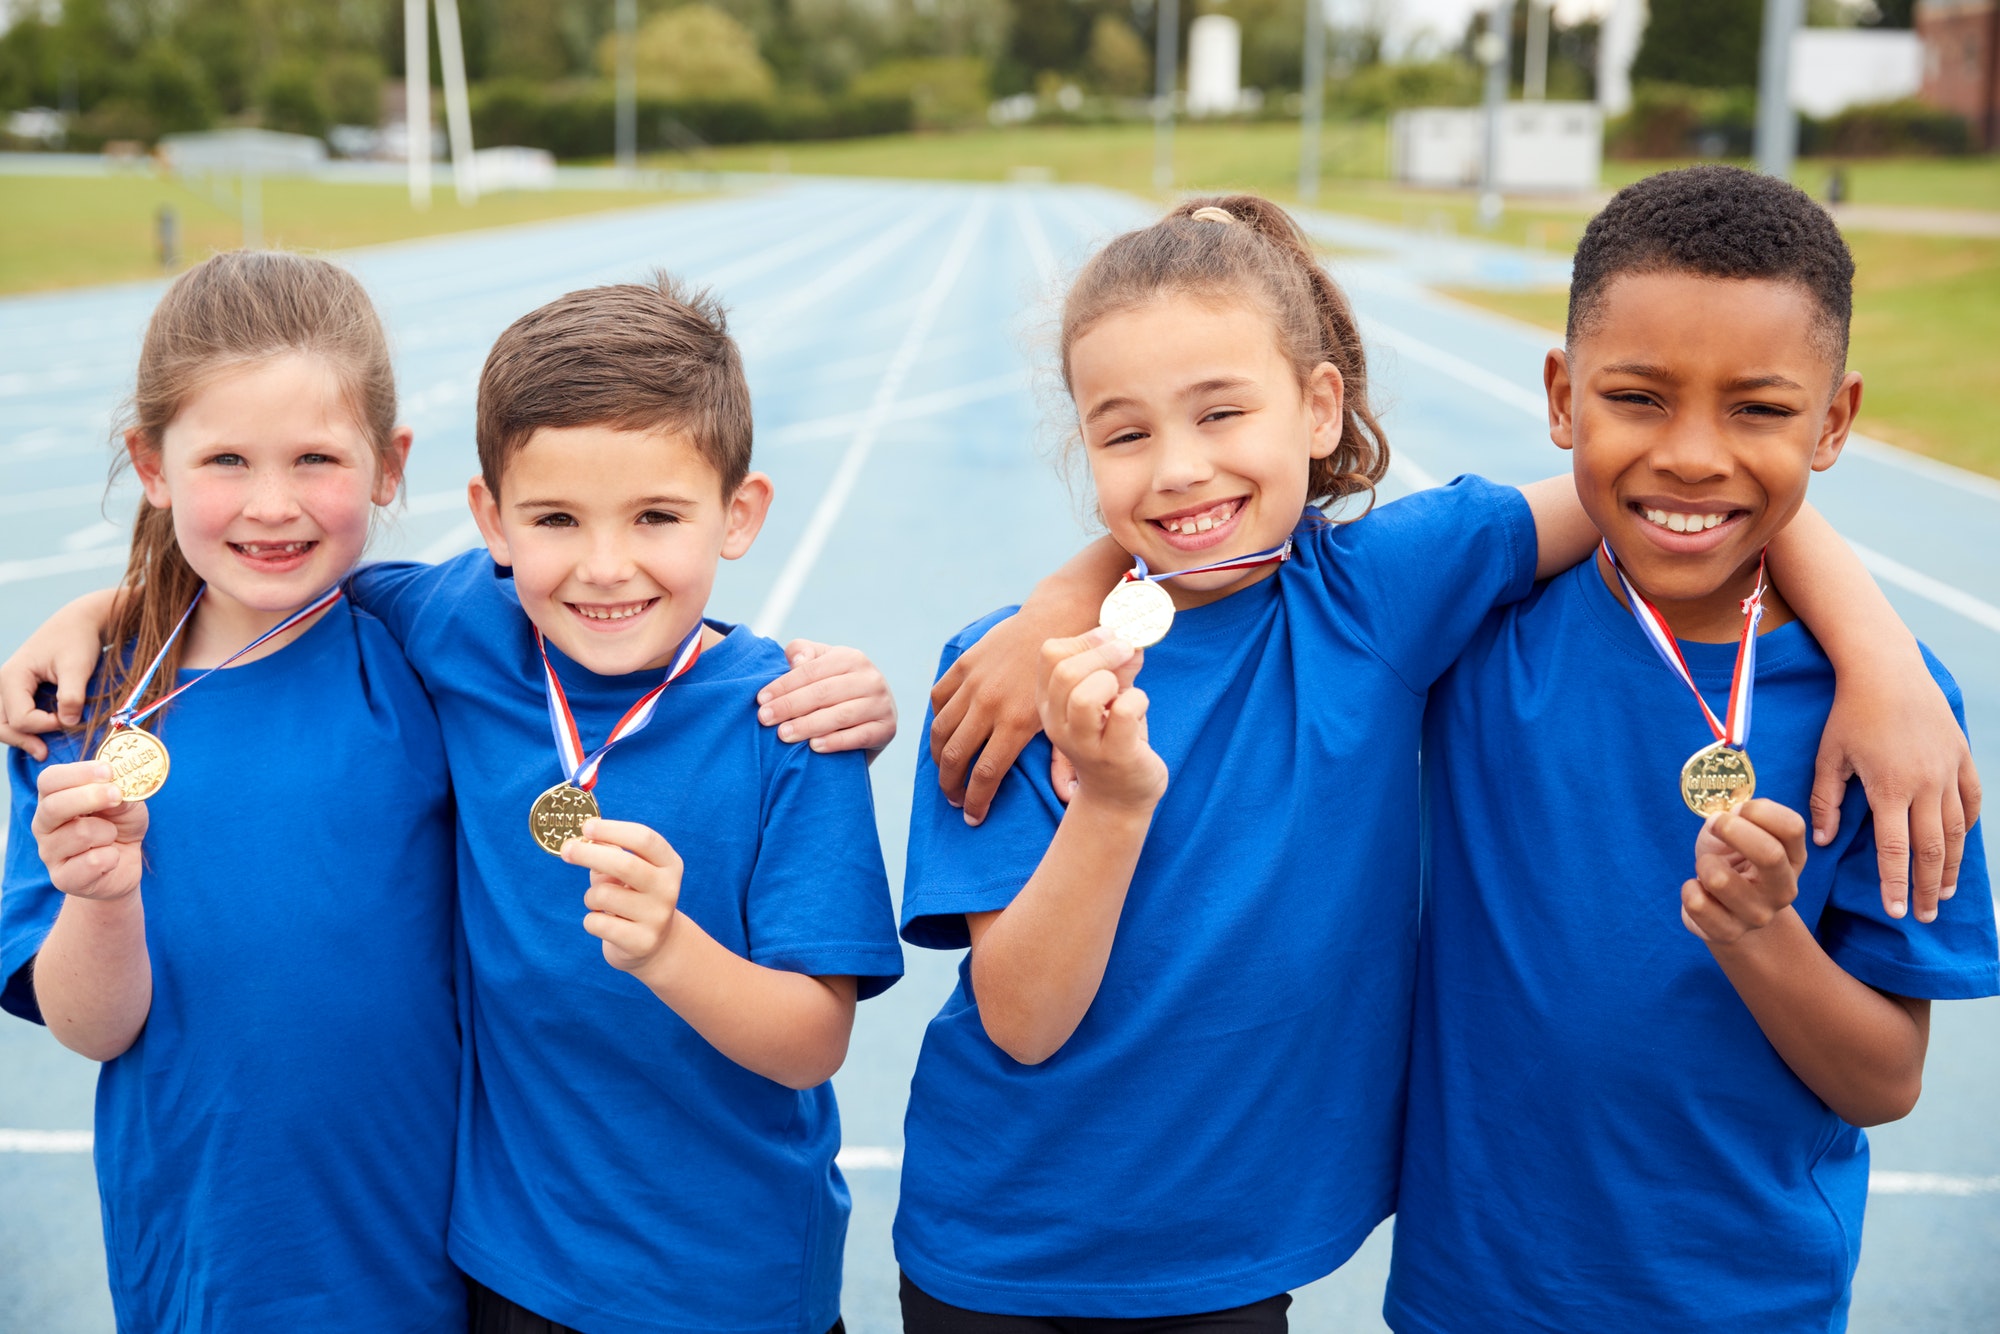 portrait-of-children-showing-off-winners-medals-on-sports-day.jpg